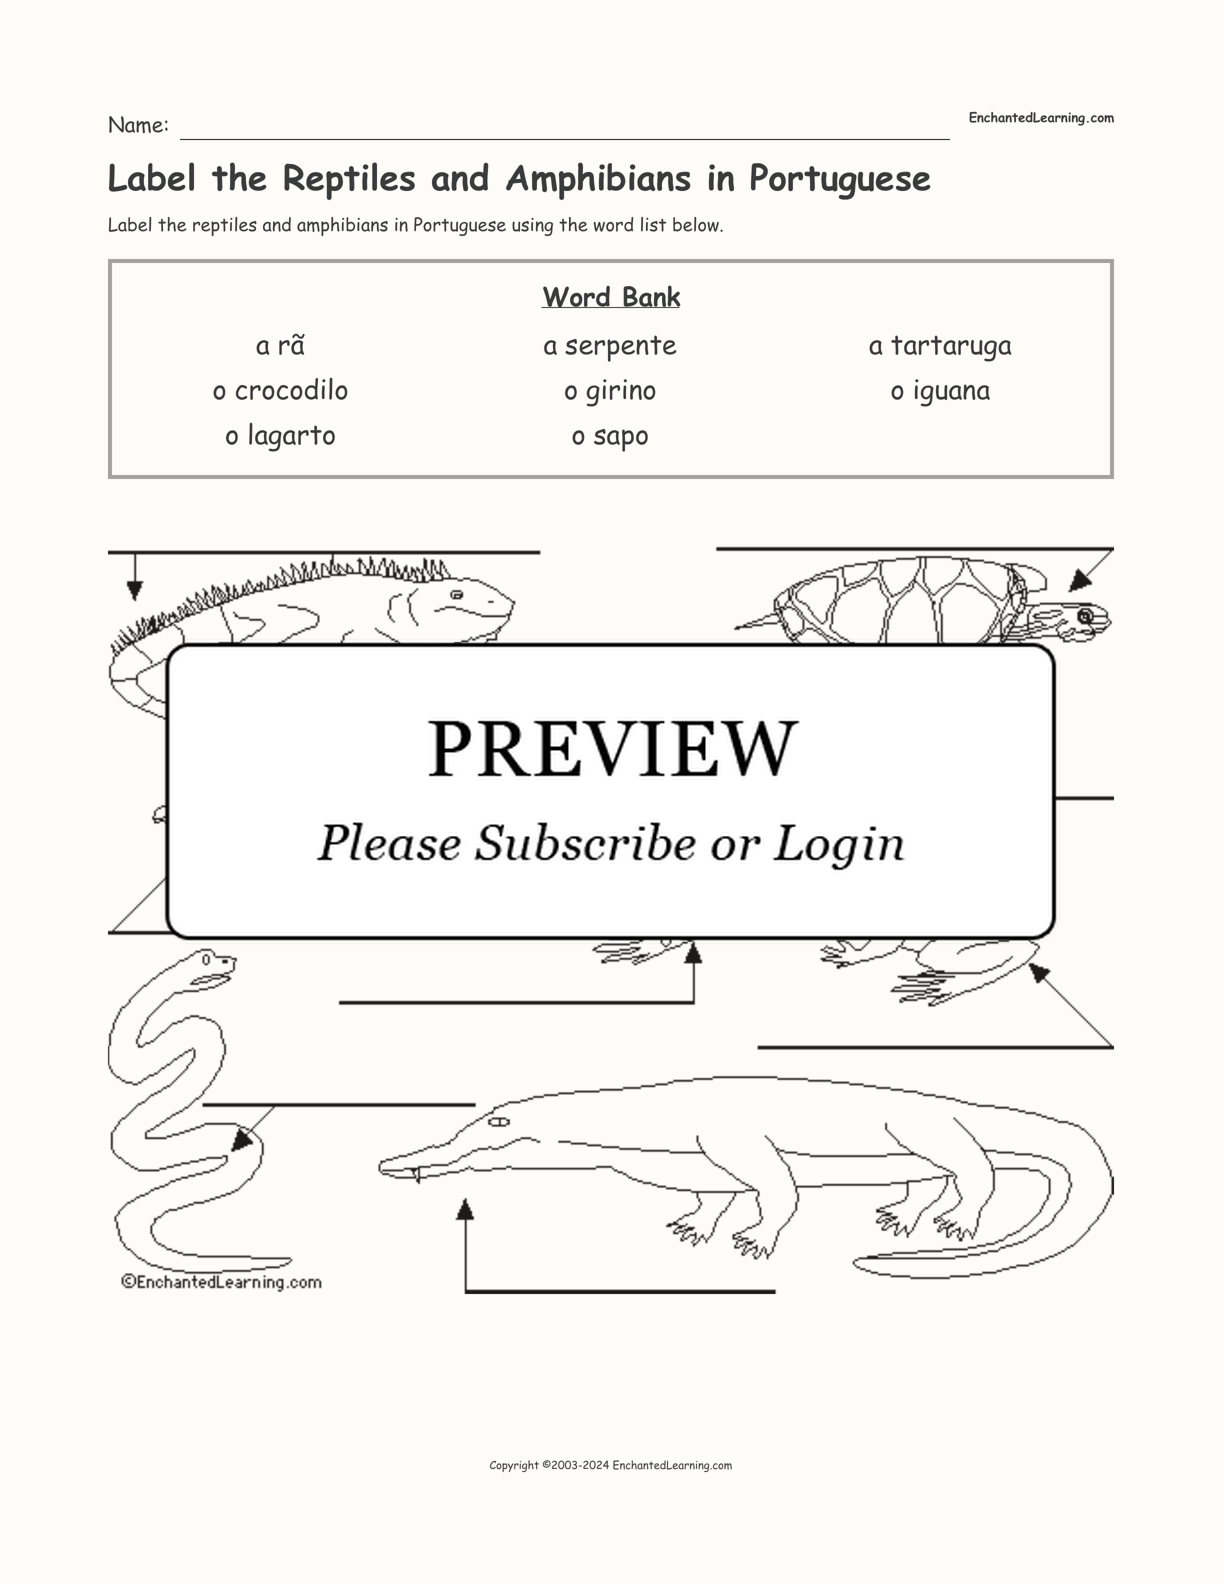 Label the Reptiles and Amphibians in Portuguese interactive worksheet page 1